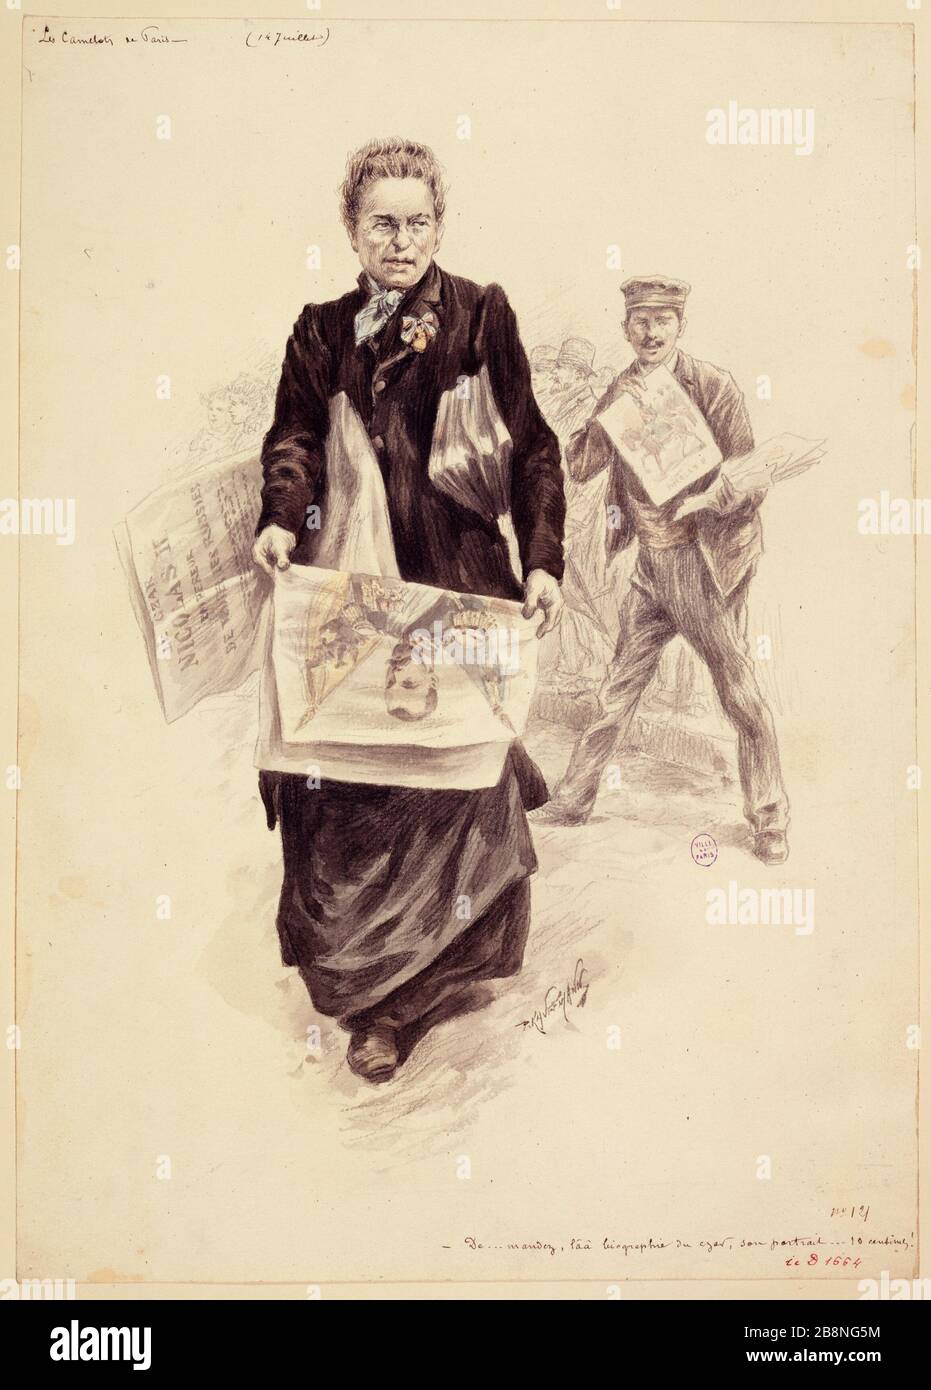 Hawkers selling portraits and cupboards Franco-Russian Paul Adolphe Kauffmann (1849-1940). Camelots vendant des portraits et placards franco-russes. Crayon rehaussé, lavis. Paris, musée Carnavalet. Stock Photo